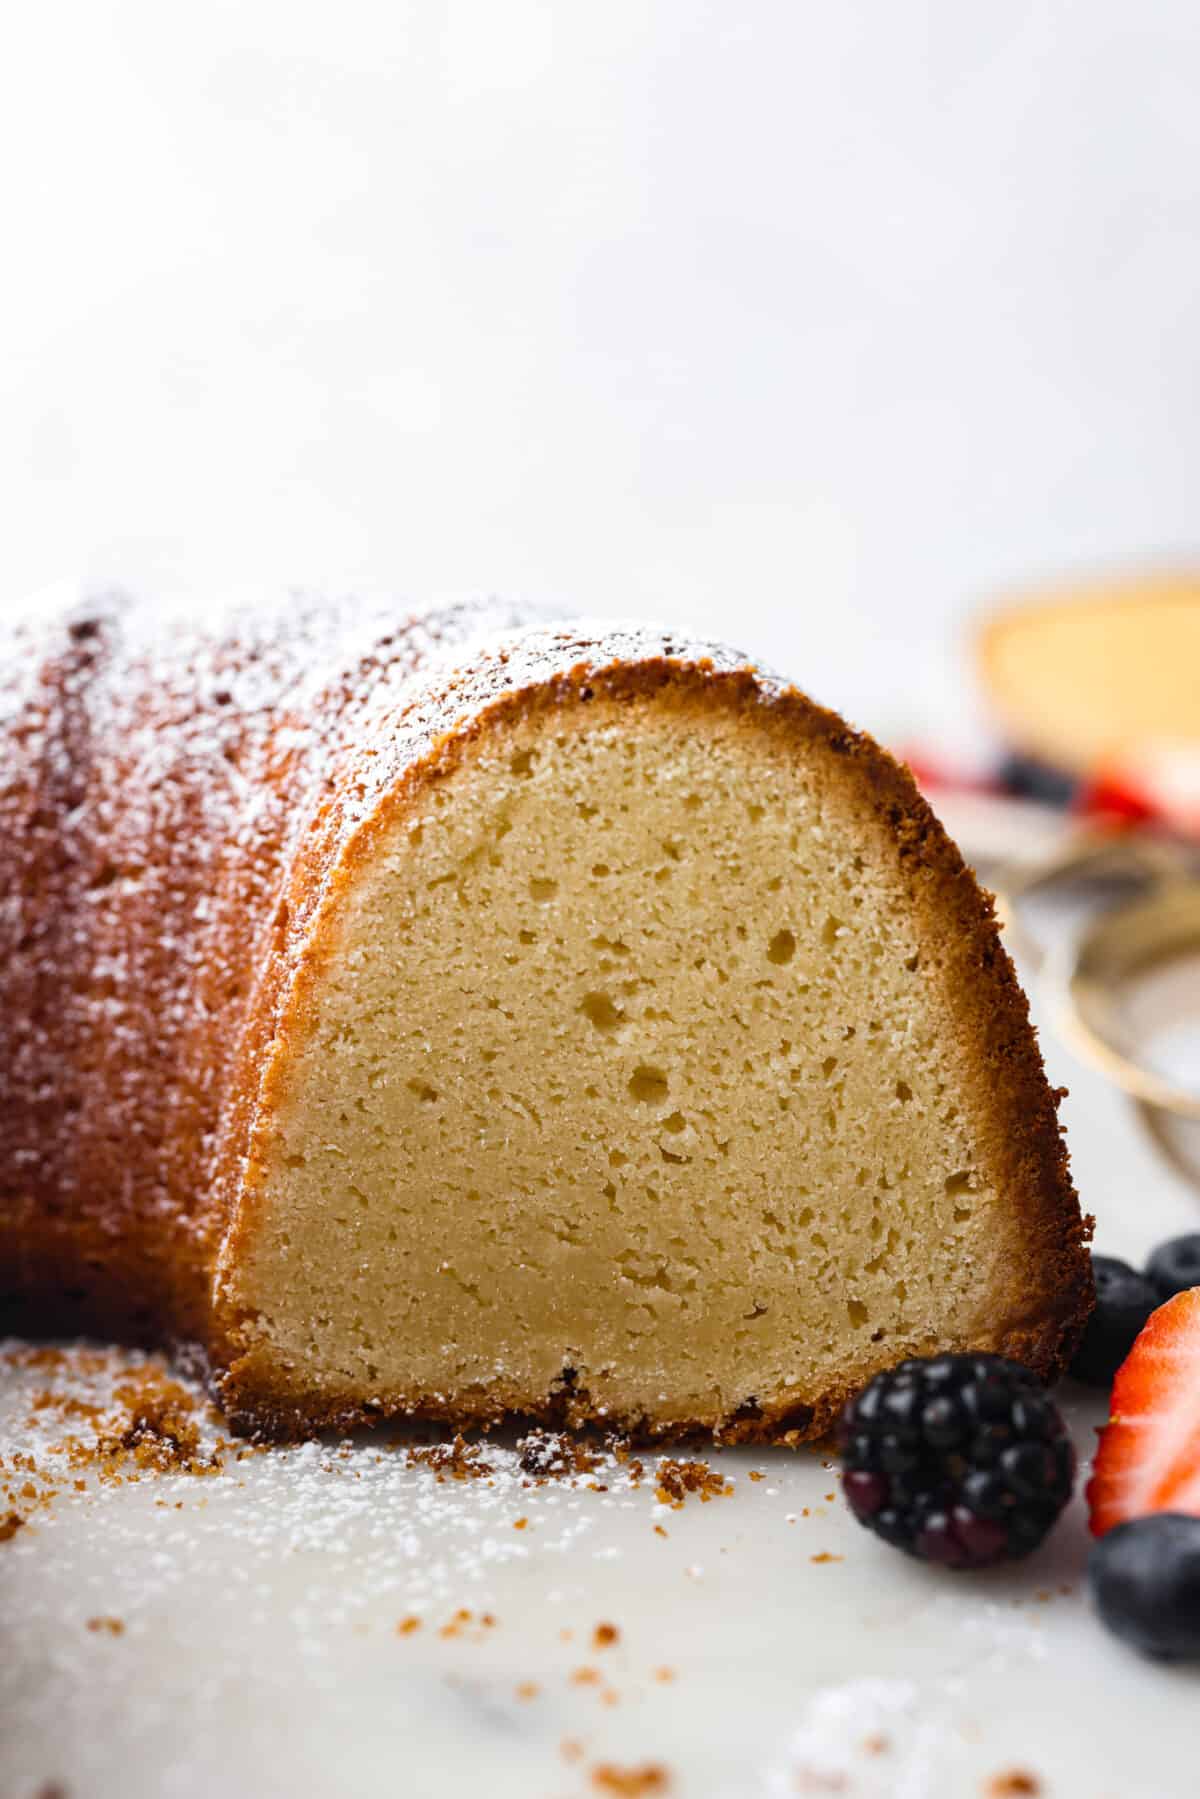 A bundt cake with a slice cut out of it so you can see the inside.